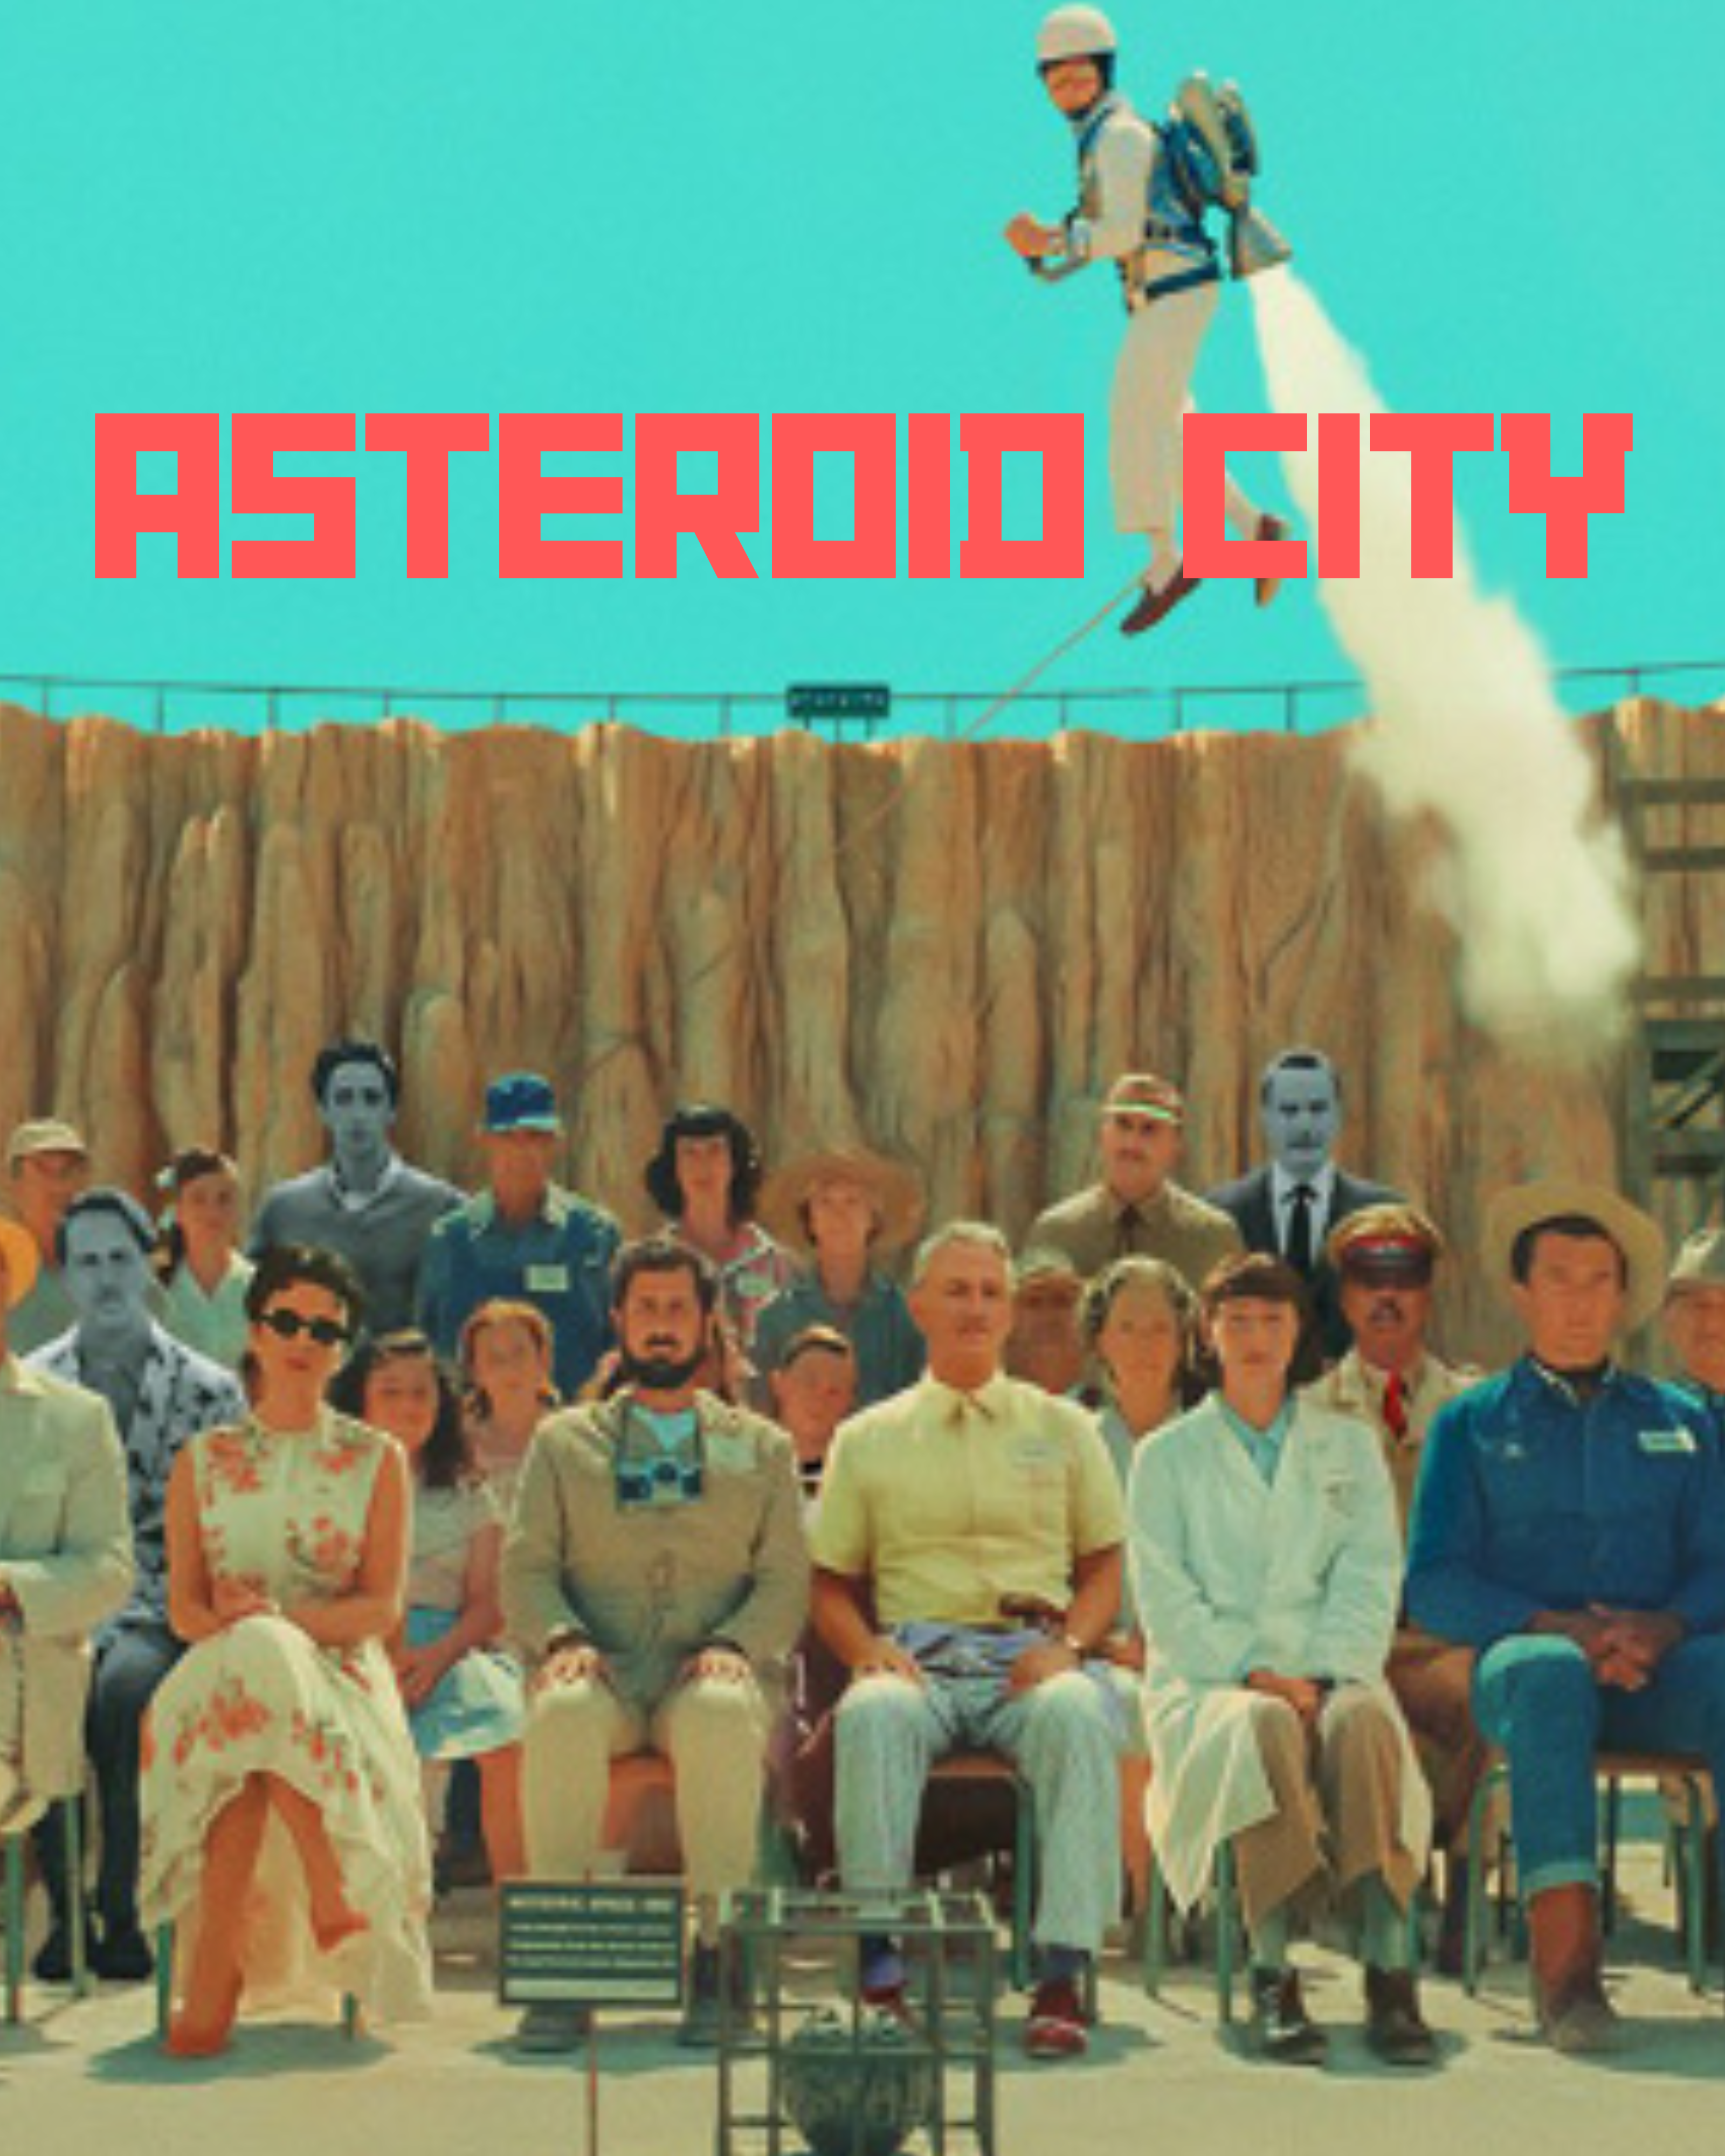 Asteroid City People in folding chairs sitting in front of fence with man launching like a rocket in sky behind them